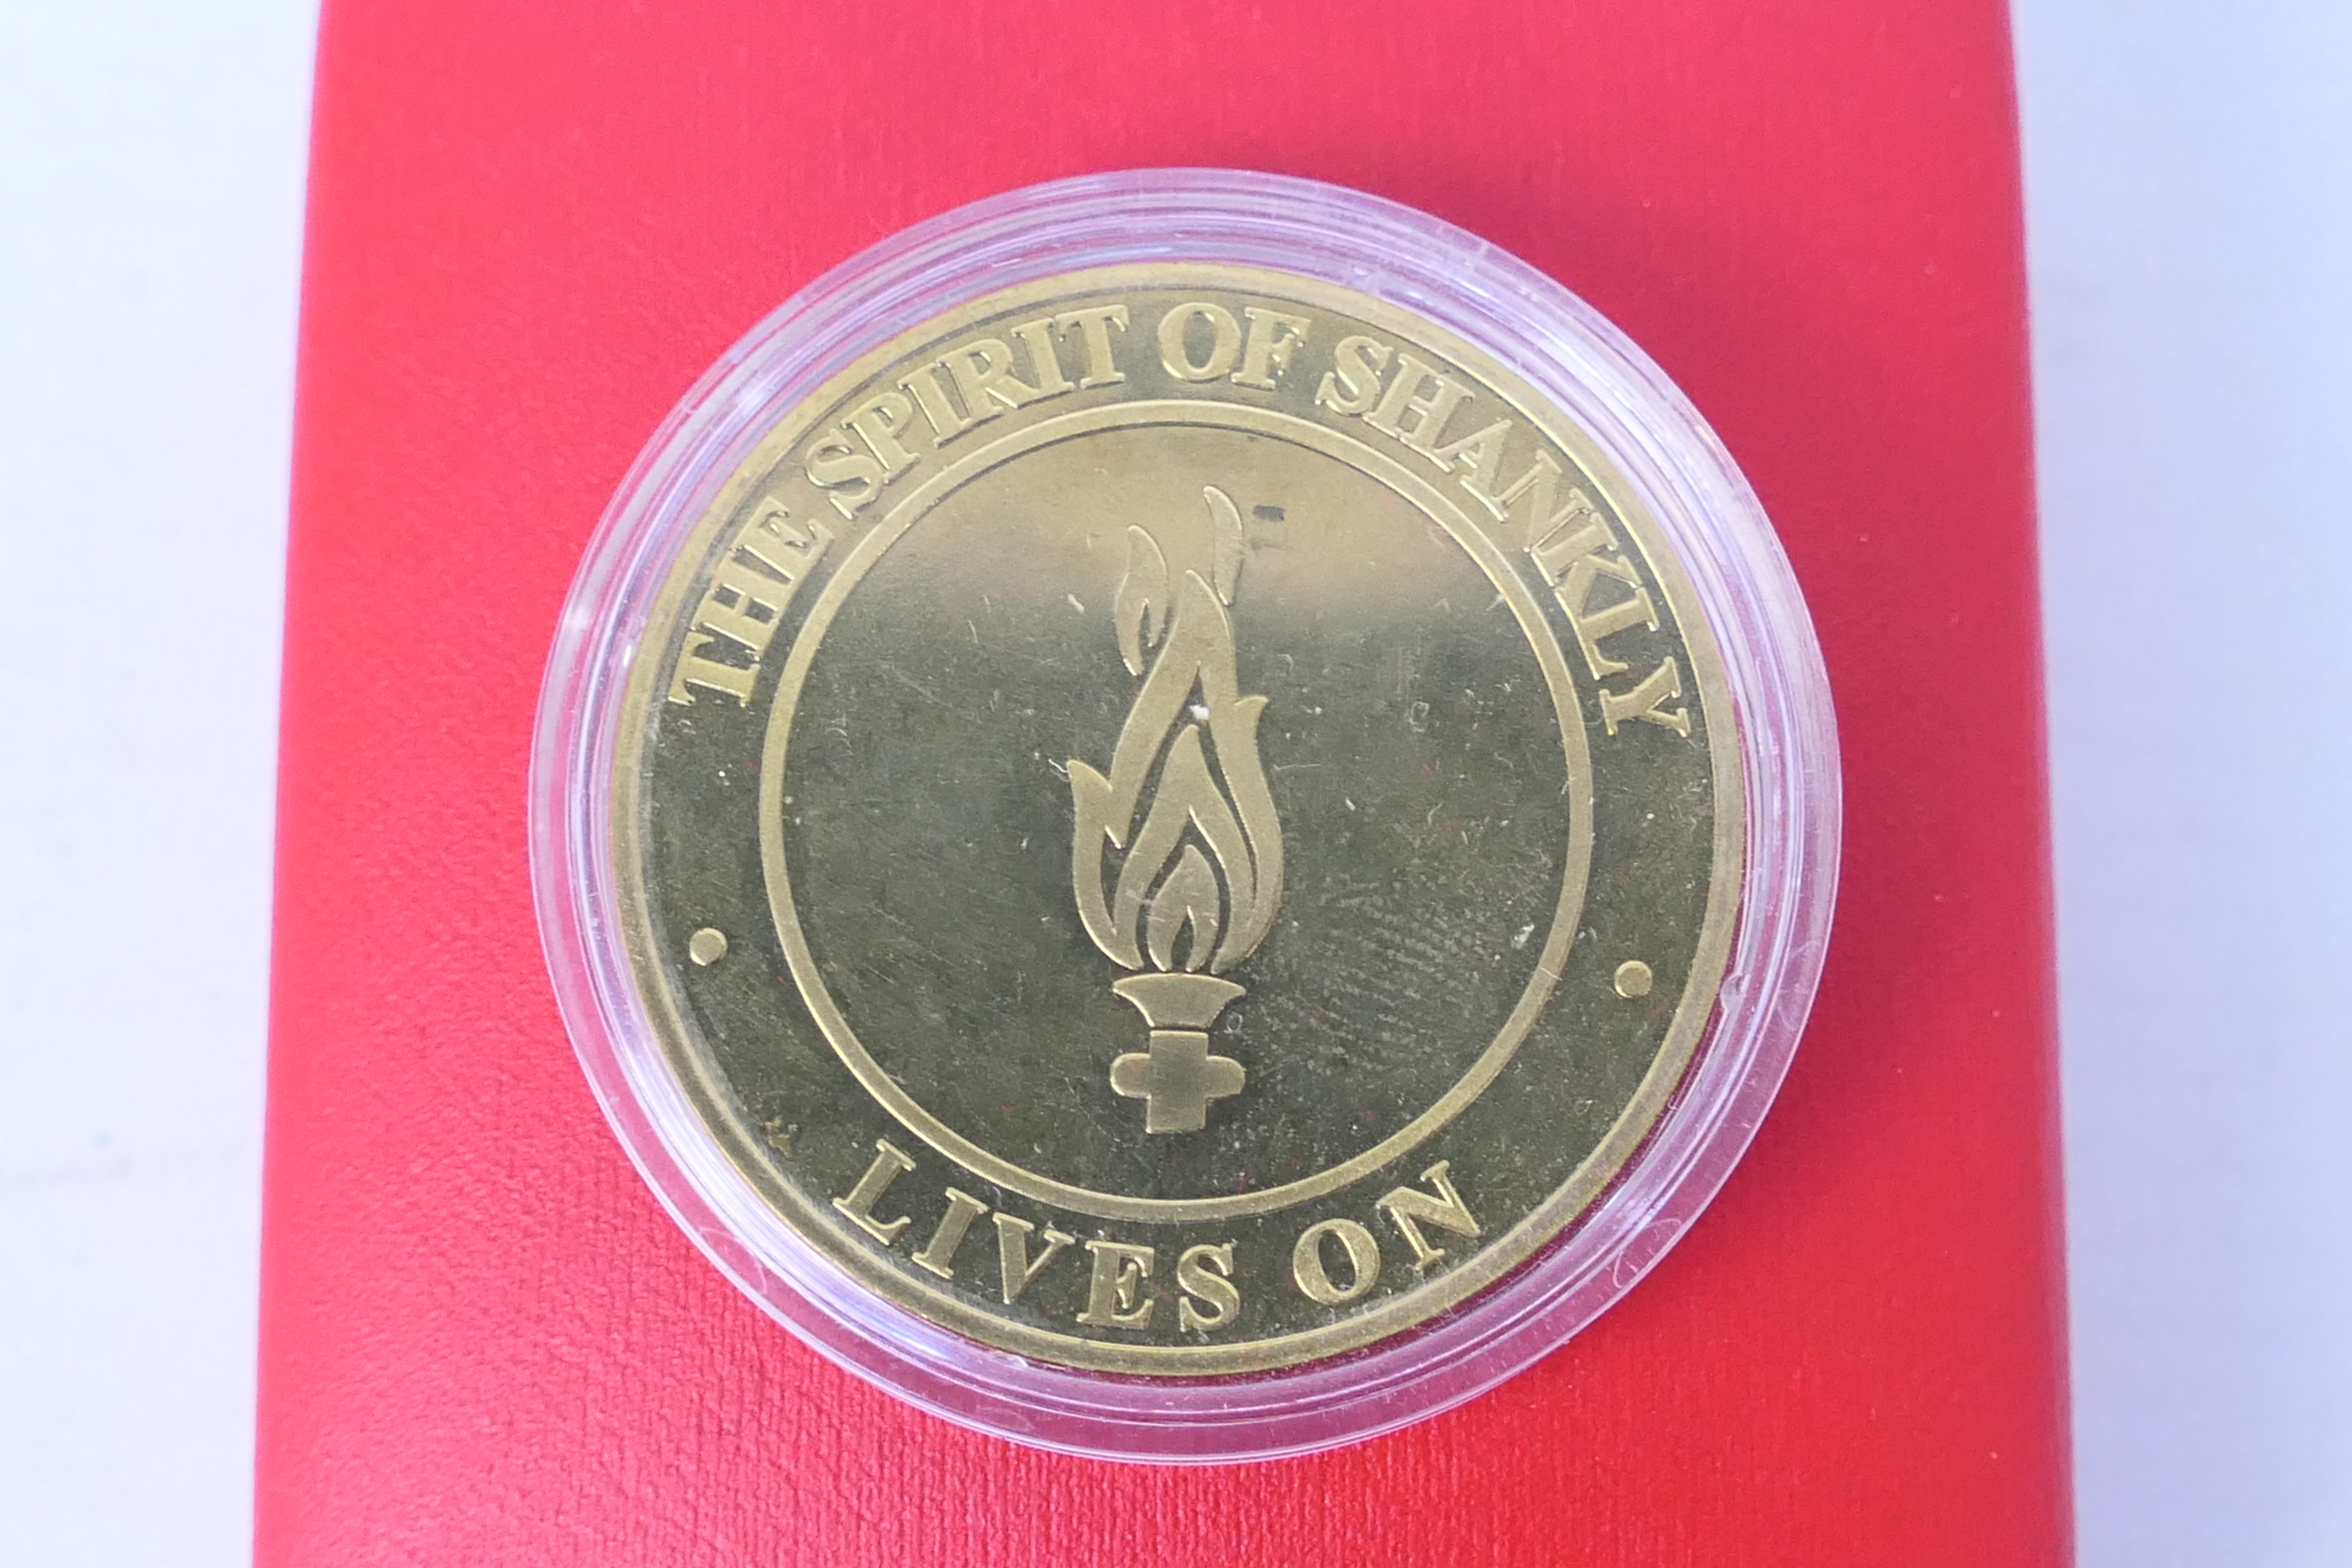 Mixed collectables to include Liverpool Football Club commemorative medals / medallions, - Image 6 of 8